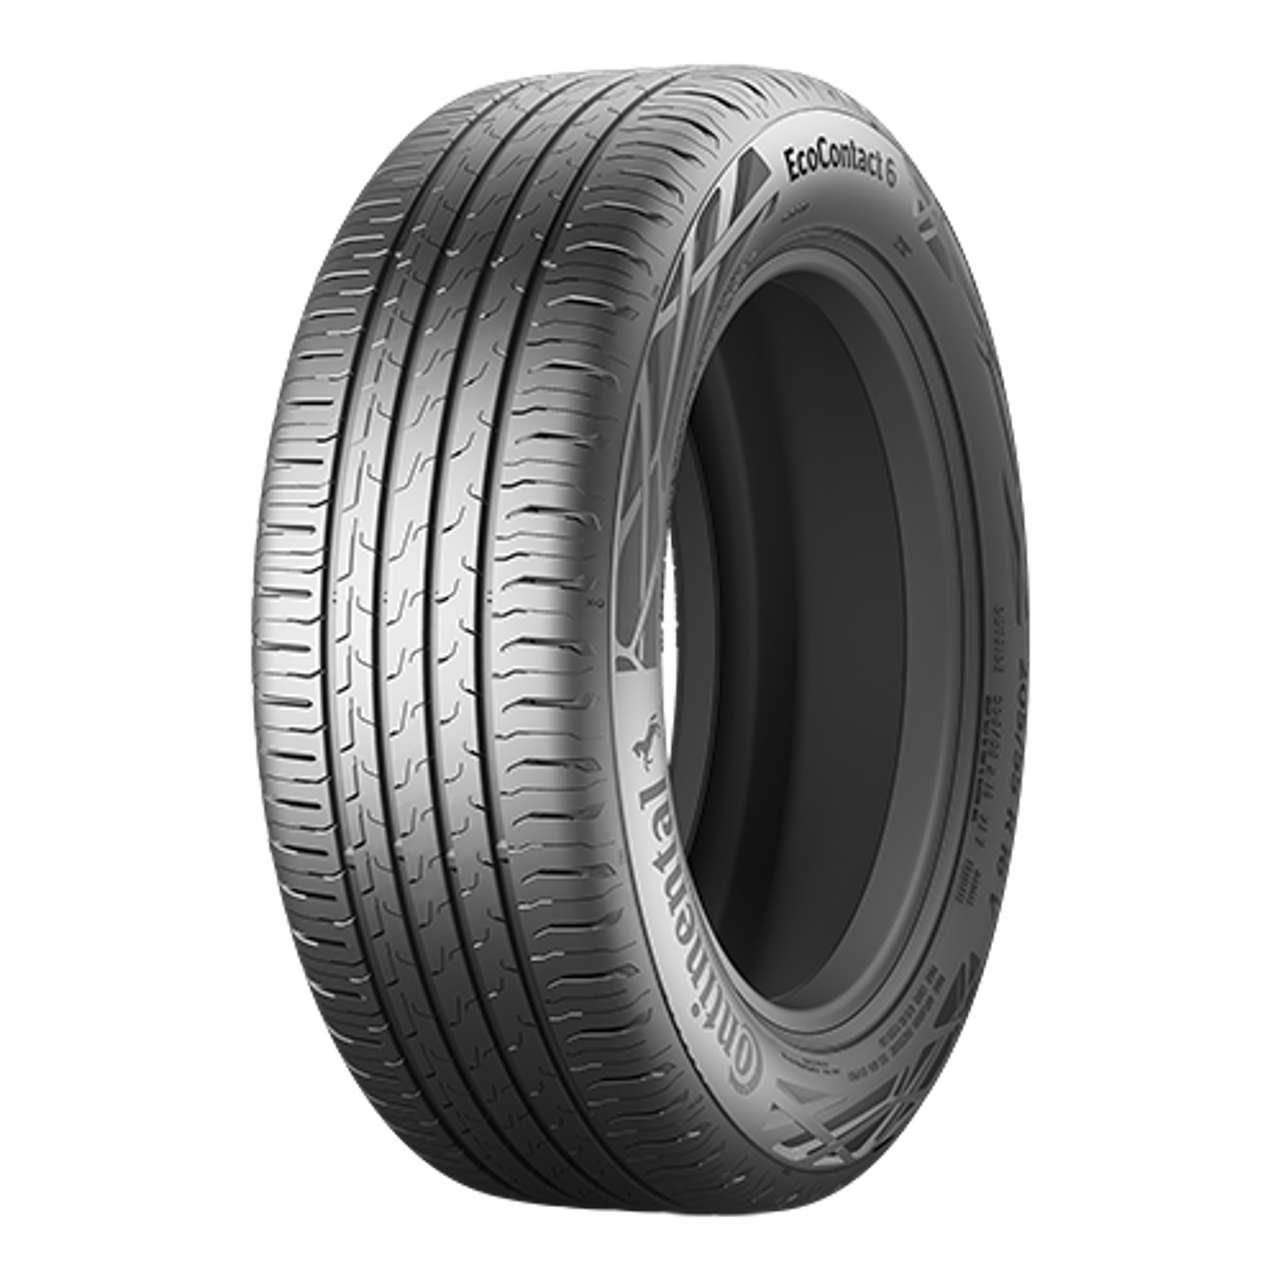 CONTINENTAL ECOCONTACT 6 (EVc) 215/55R17 98H von Continental